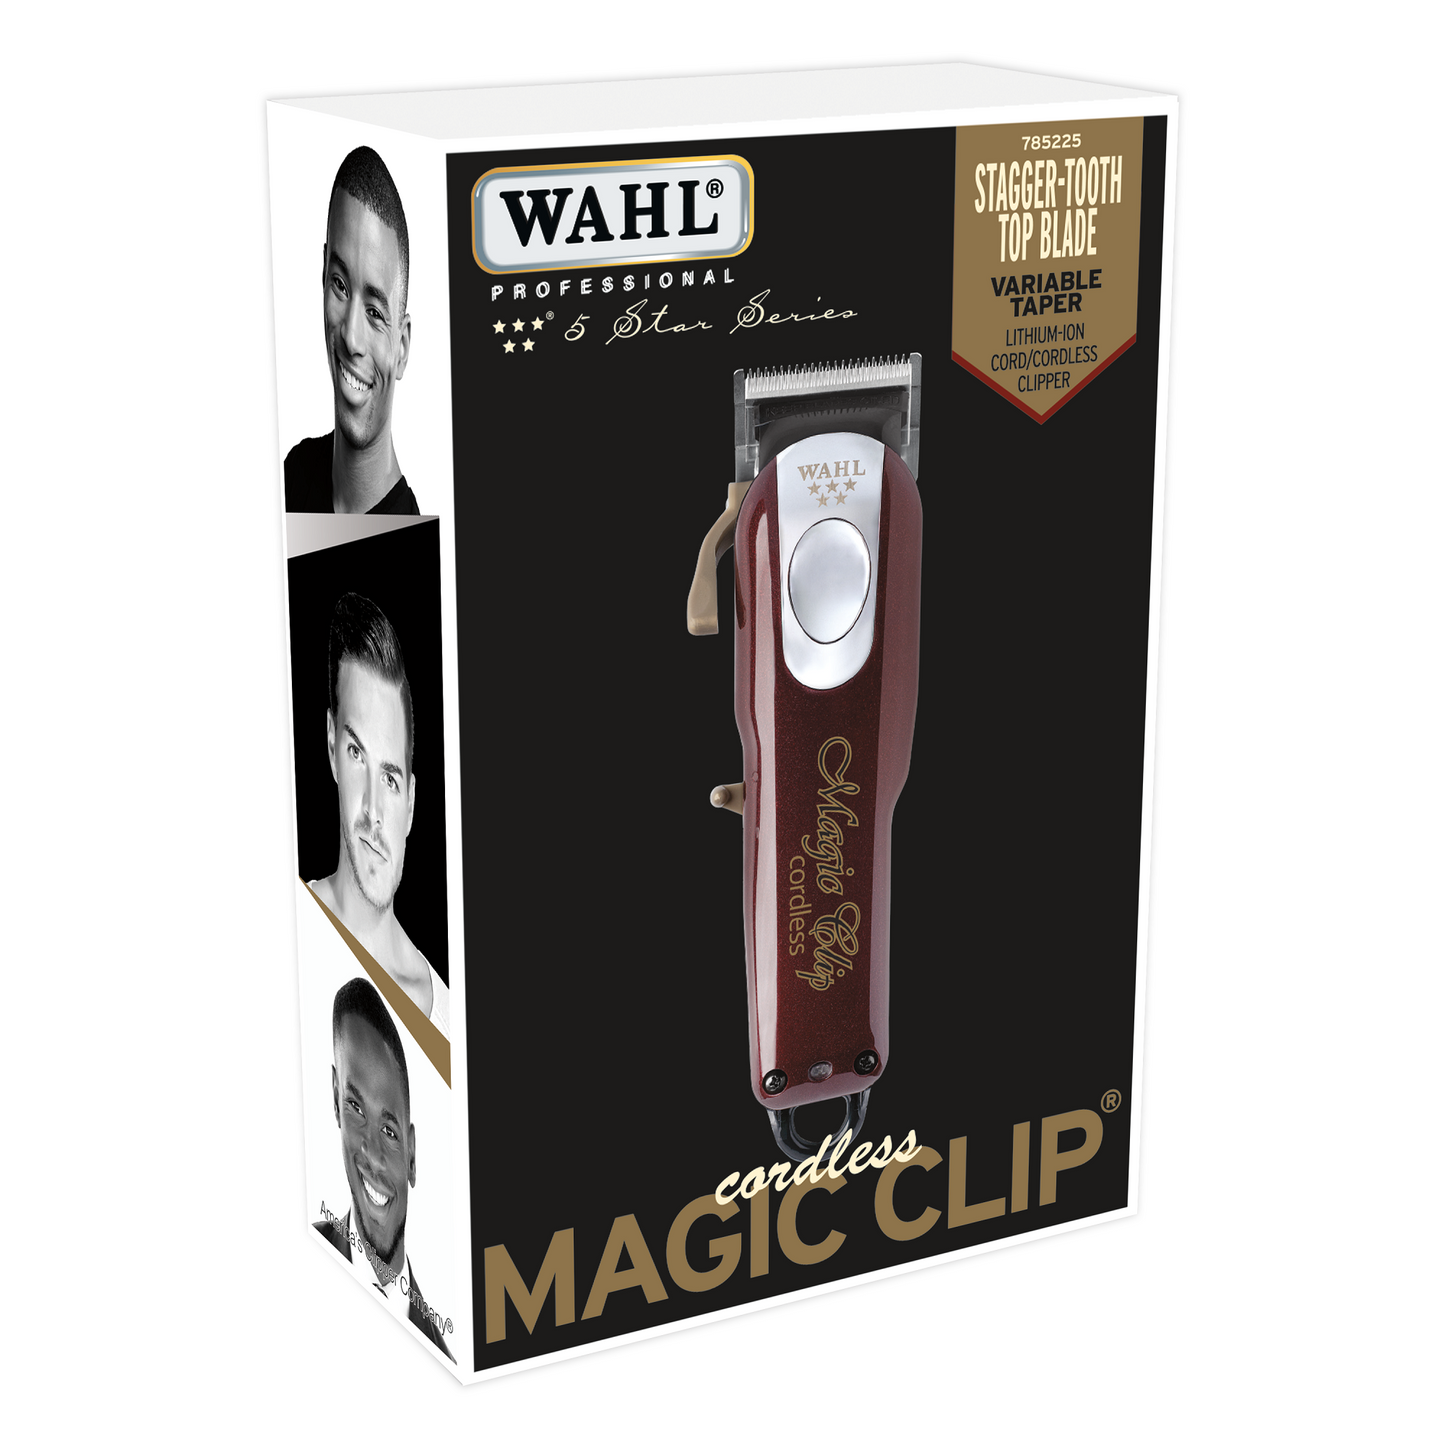 WAHL 5 Star Series Magic Clippers (Cordless)